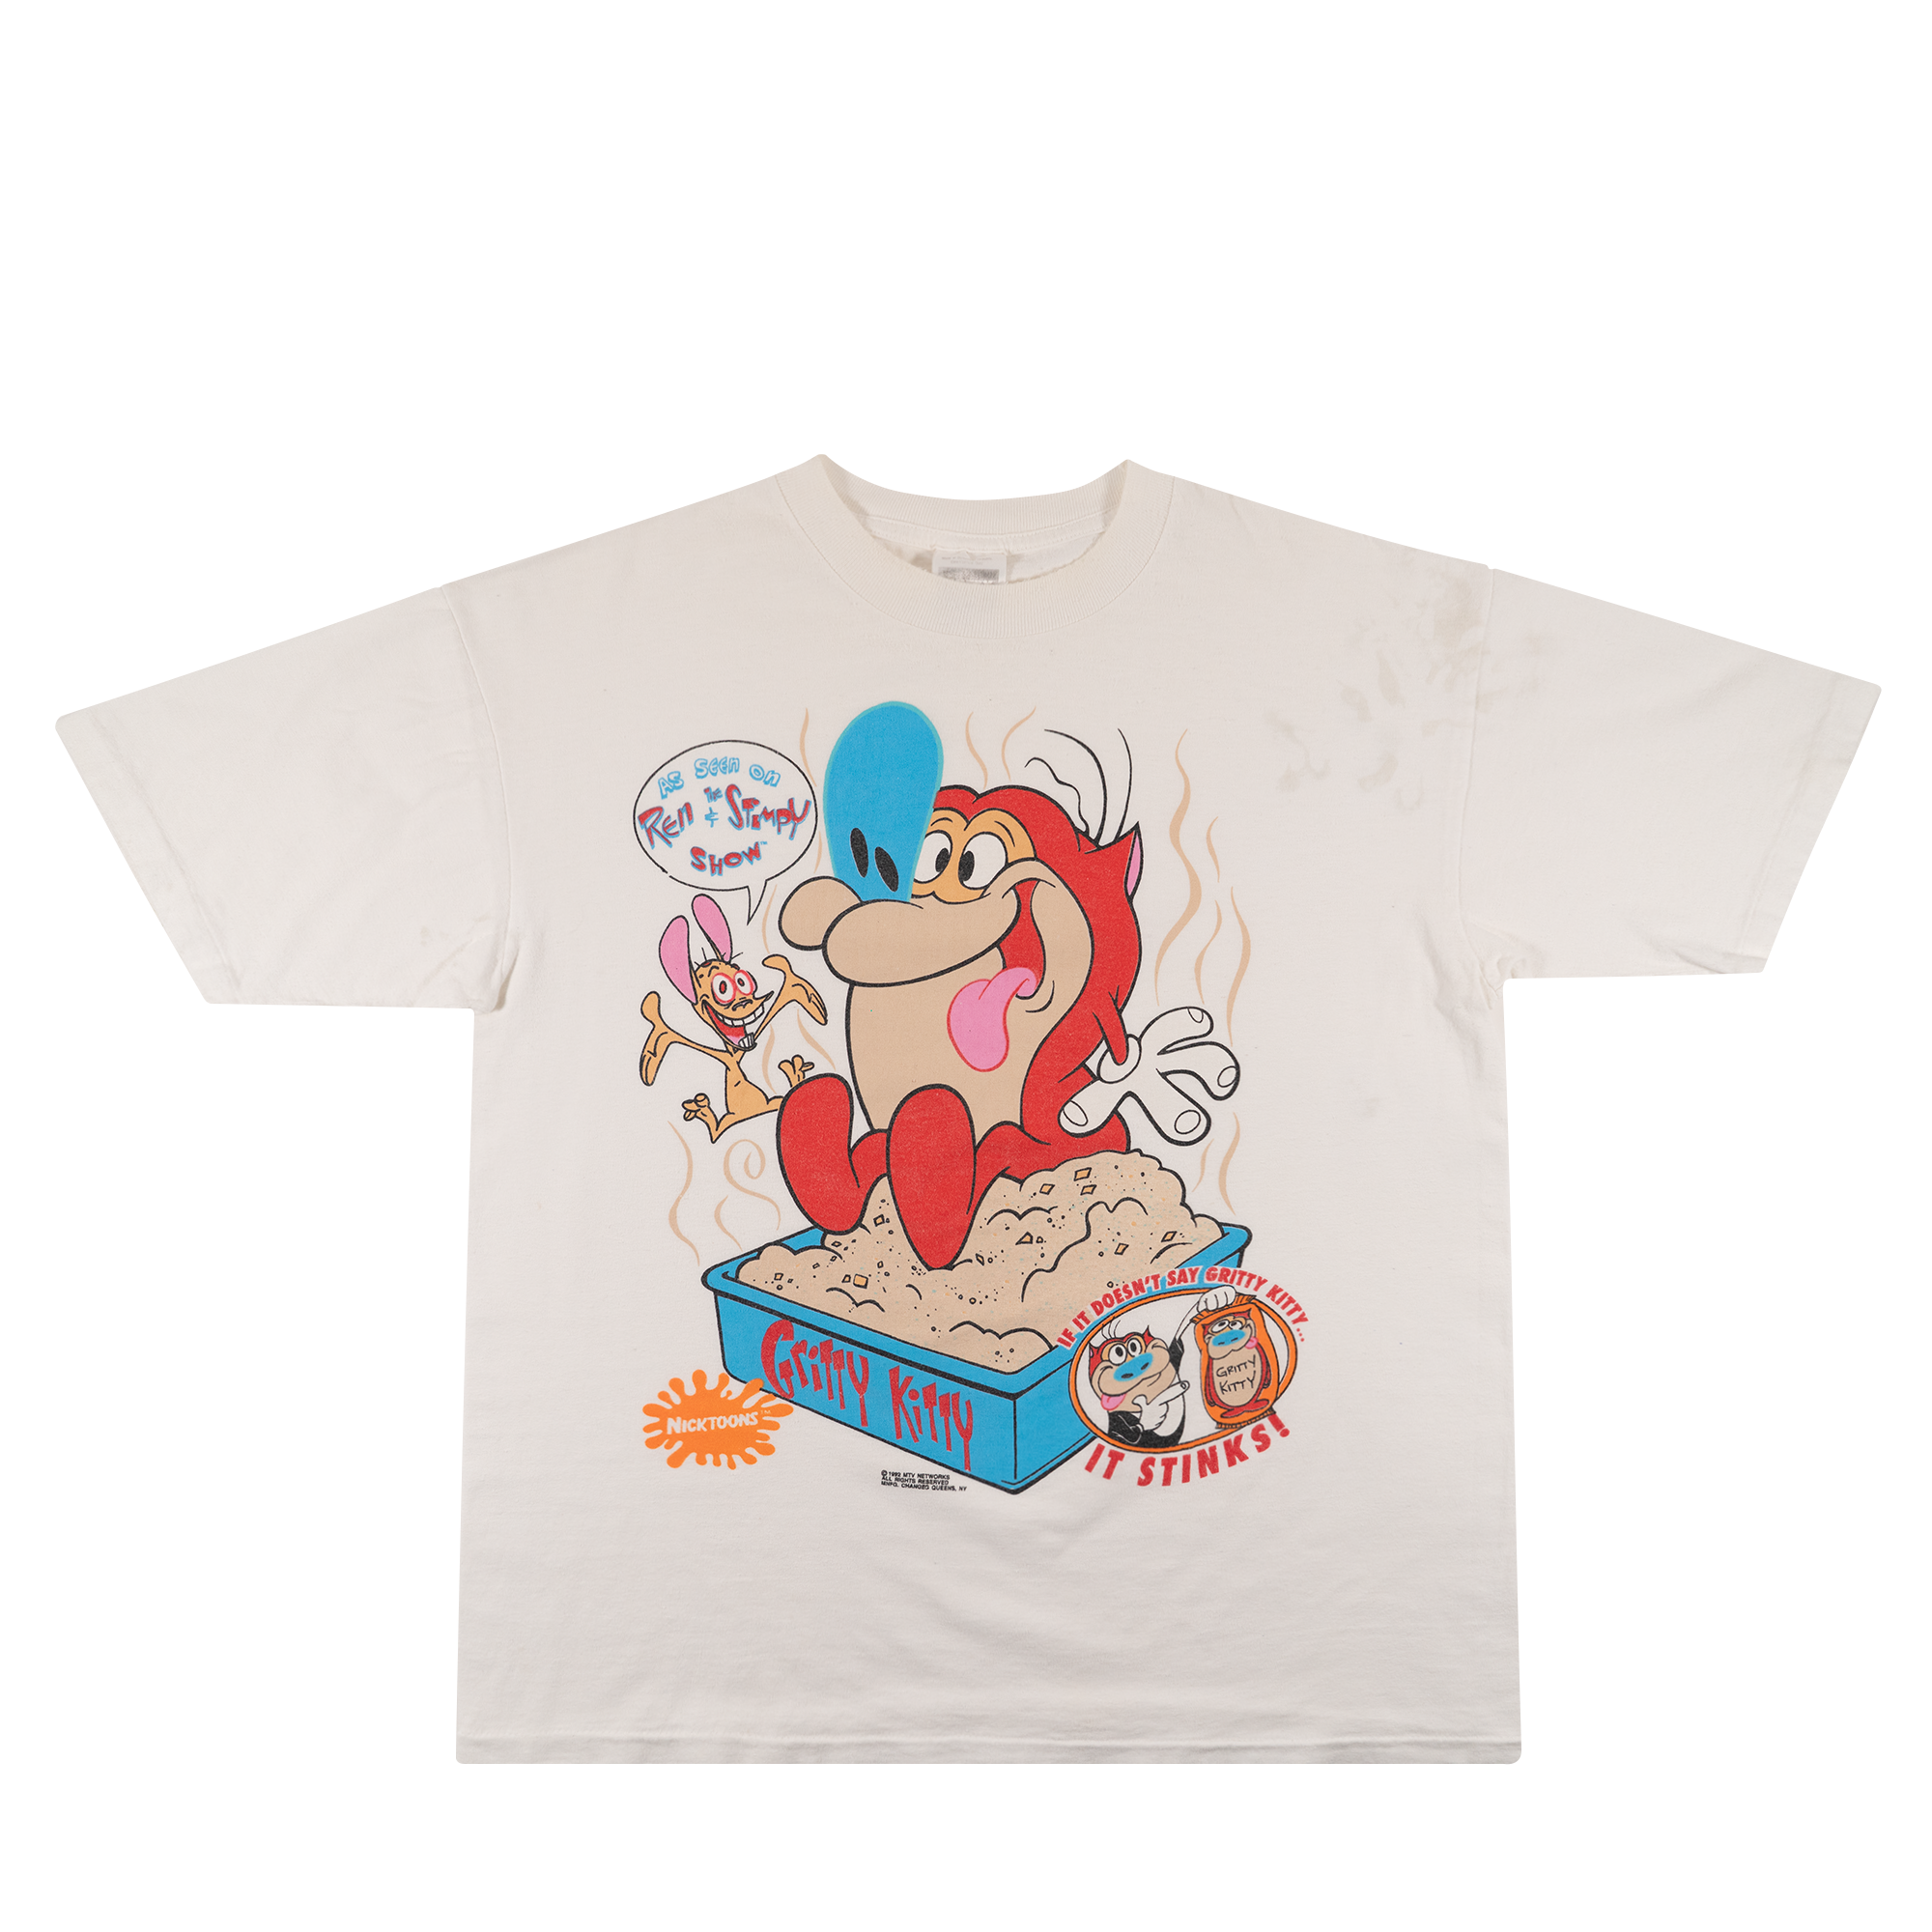 The Ren And Stimpy Show 1992 Nicktoons Tee White-PLUS